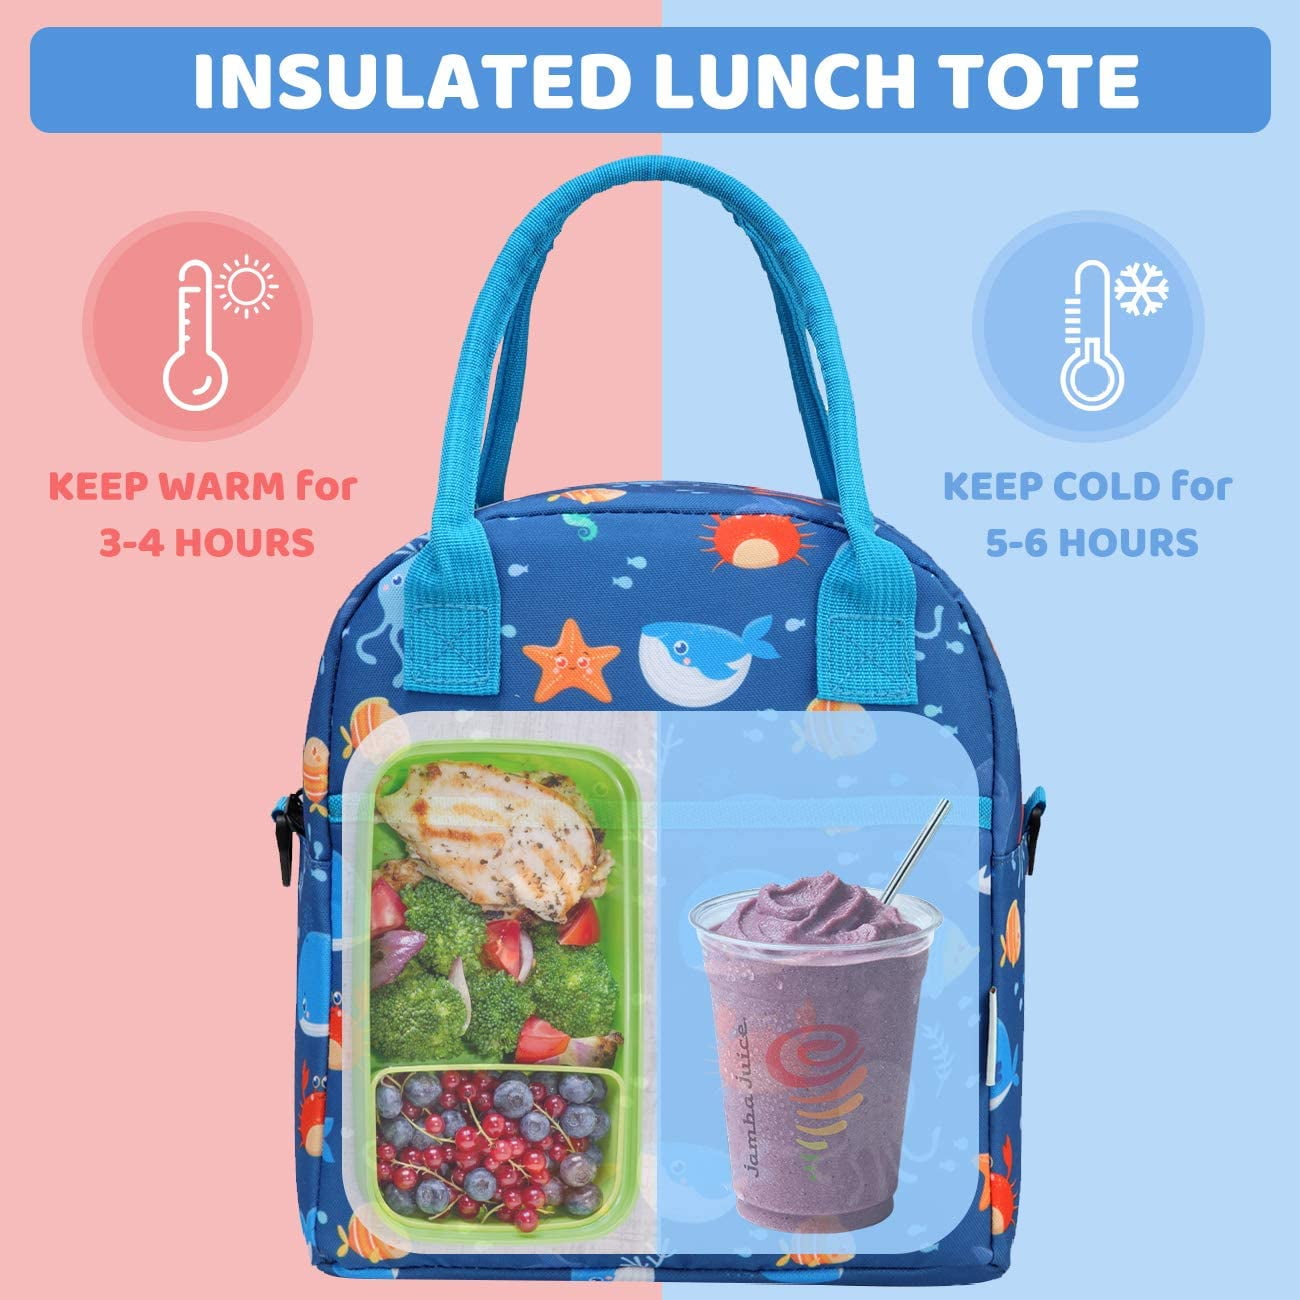 Details about   Trucks Thermal Insulated Lunch Box Cooler Bag Cute Boys Kids Tote Small for 